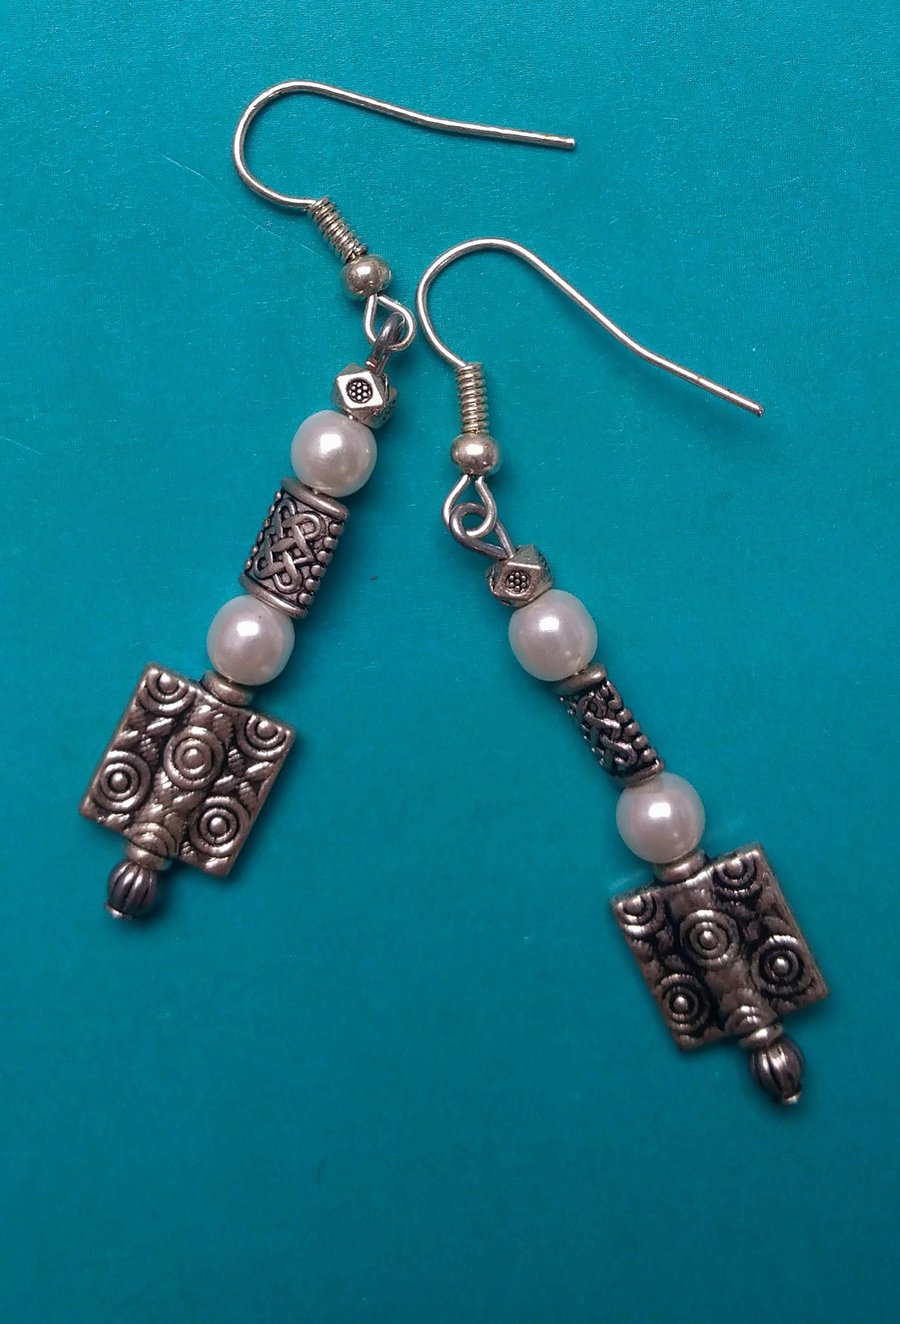 Unique Handmade Dangly Earrings in Tibetan Silver and Pearls